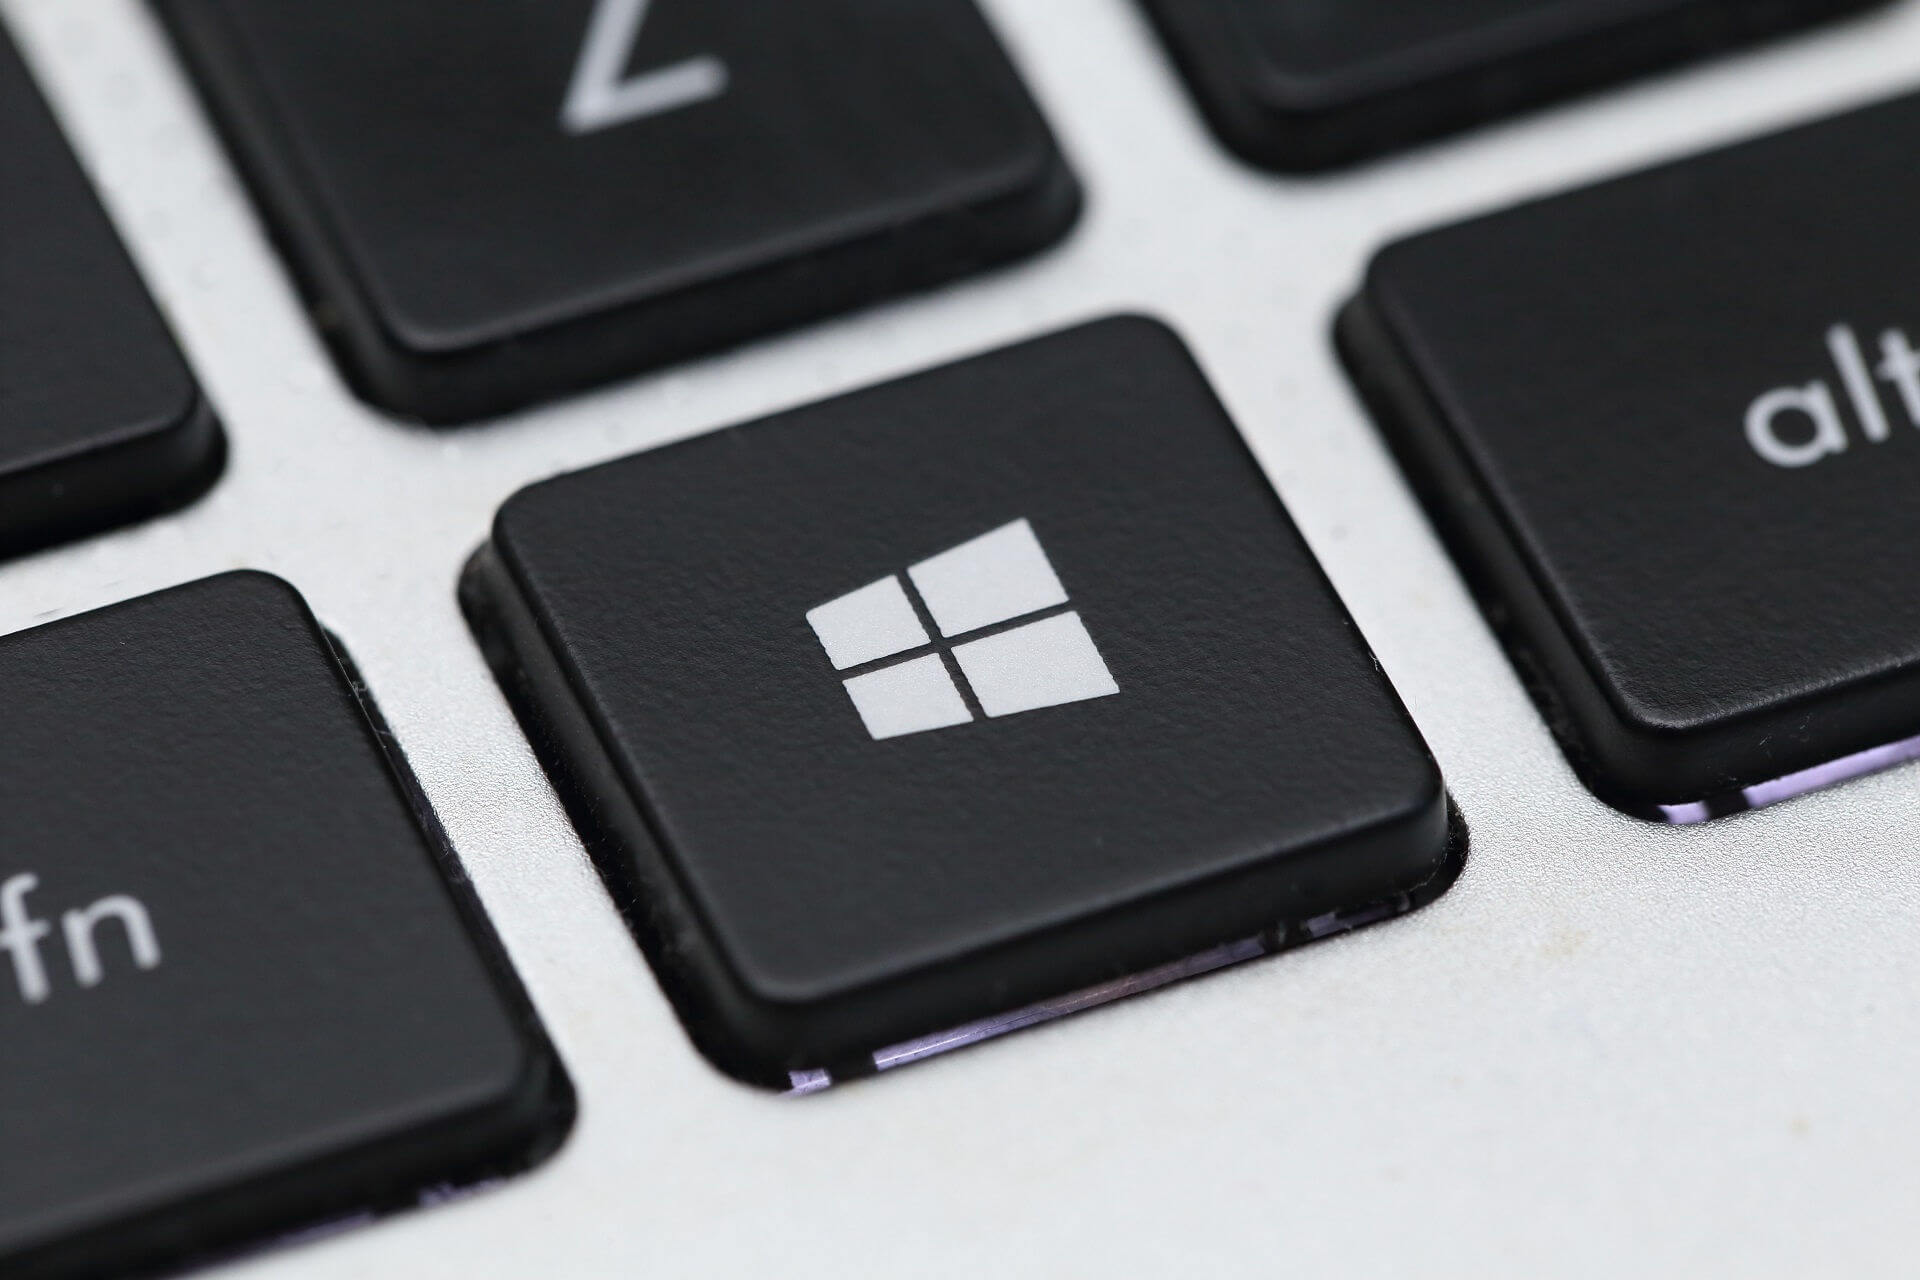 How to fix Windows 10 wakes up from sleep on its own